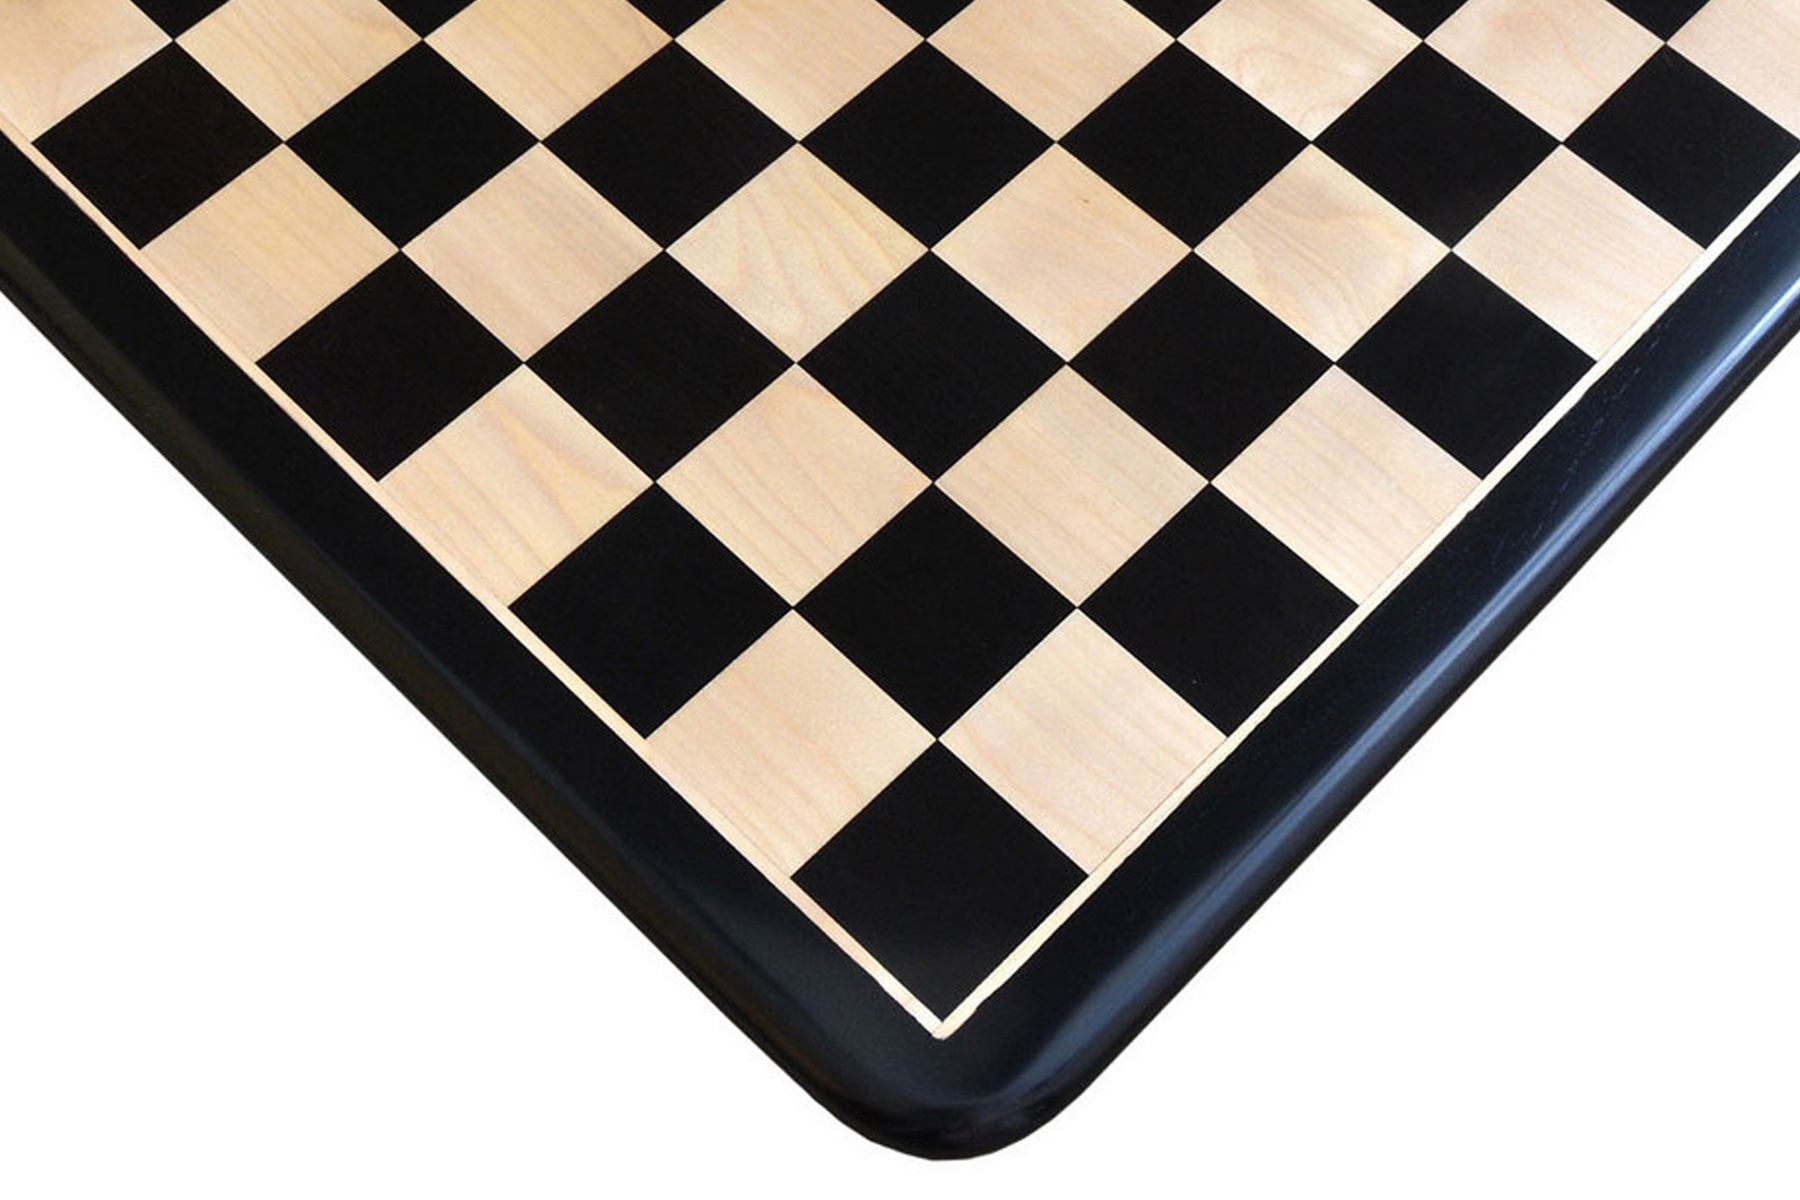 19" Wooden Large Chess Board Black Ebony Wood & Maple with 2" Sq Hand Carved 